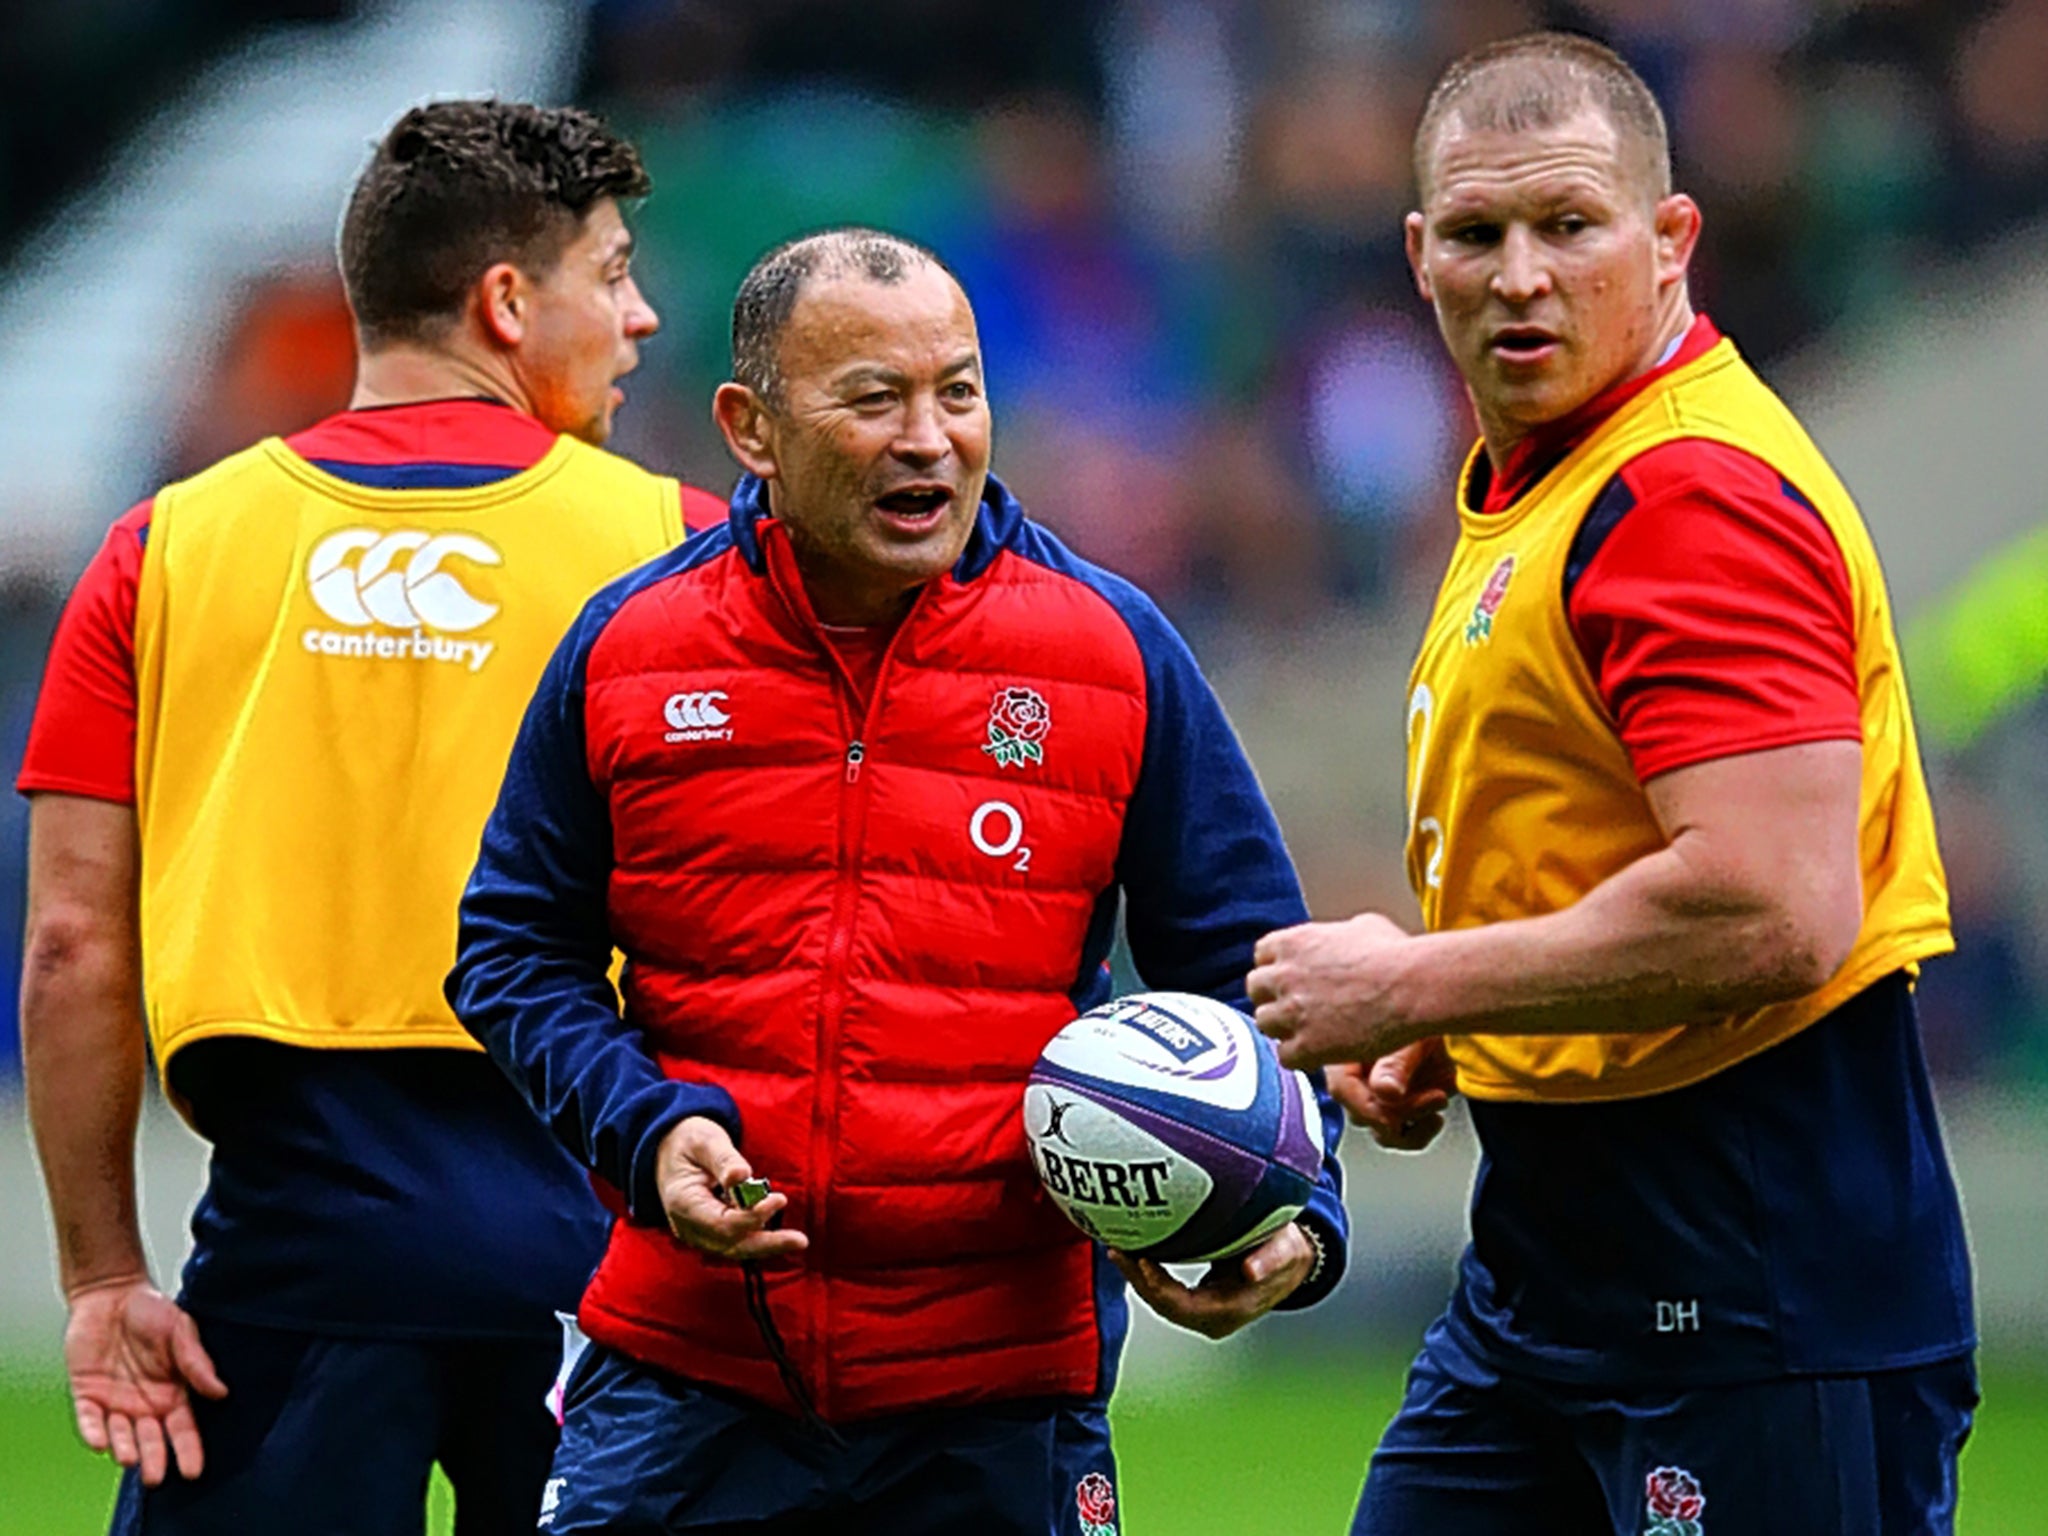 Eddie Jones speaks with the new England captain, Dylan Hartley, during a training session at Twickenham